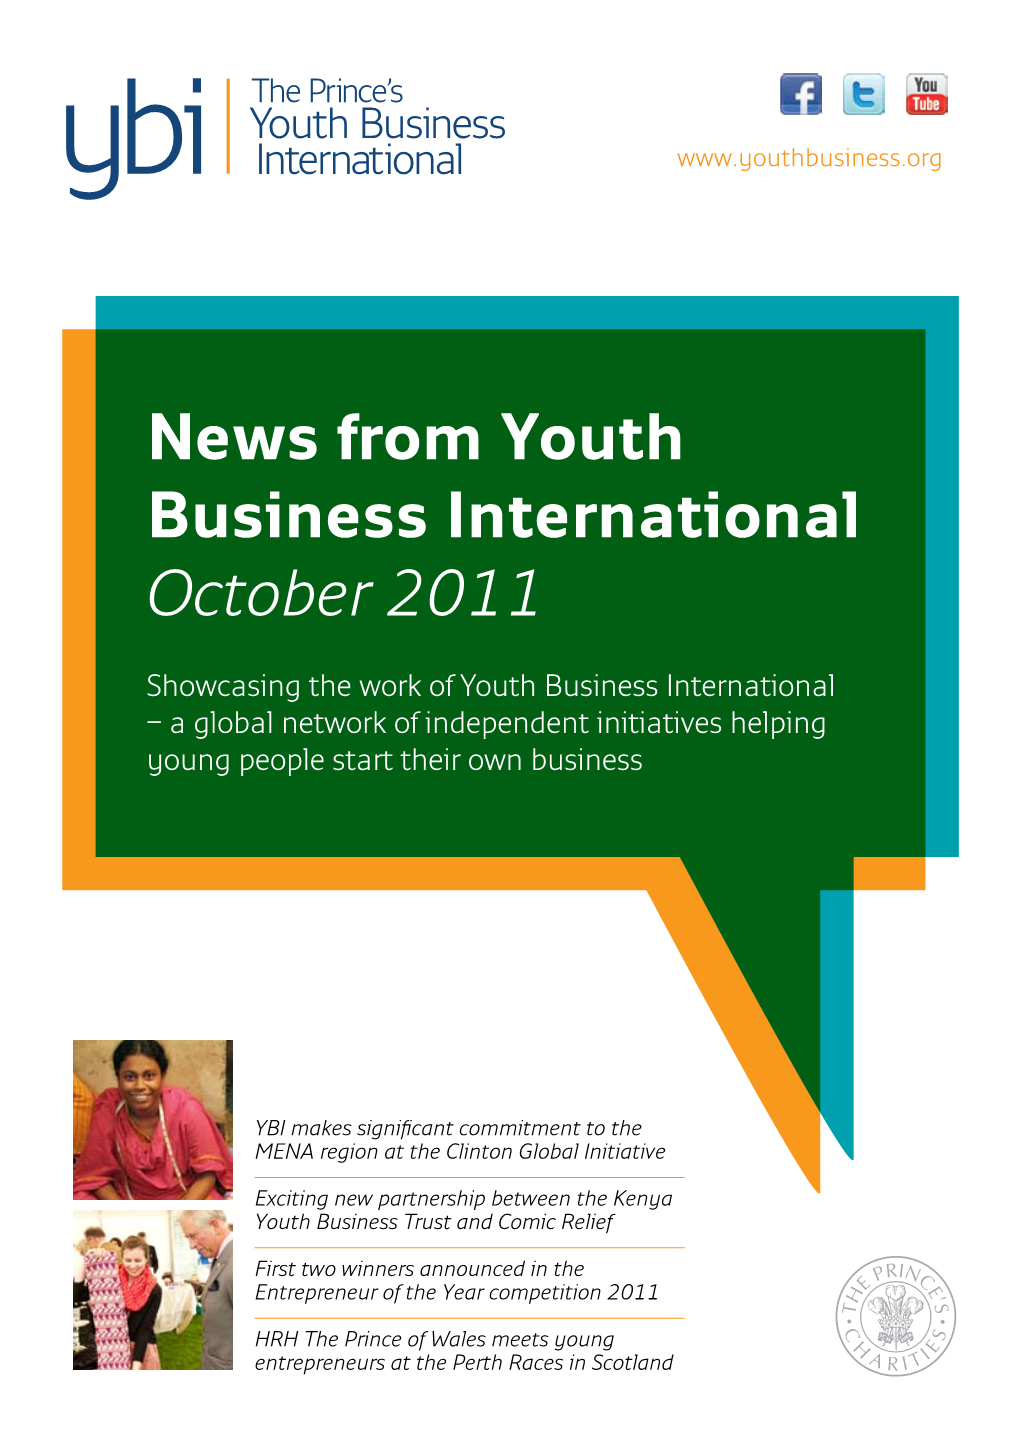 News from Youth Business International October 2011